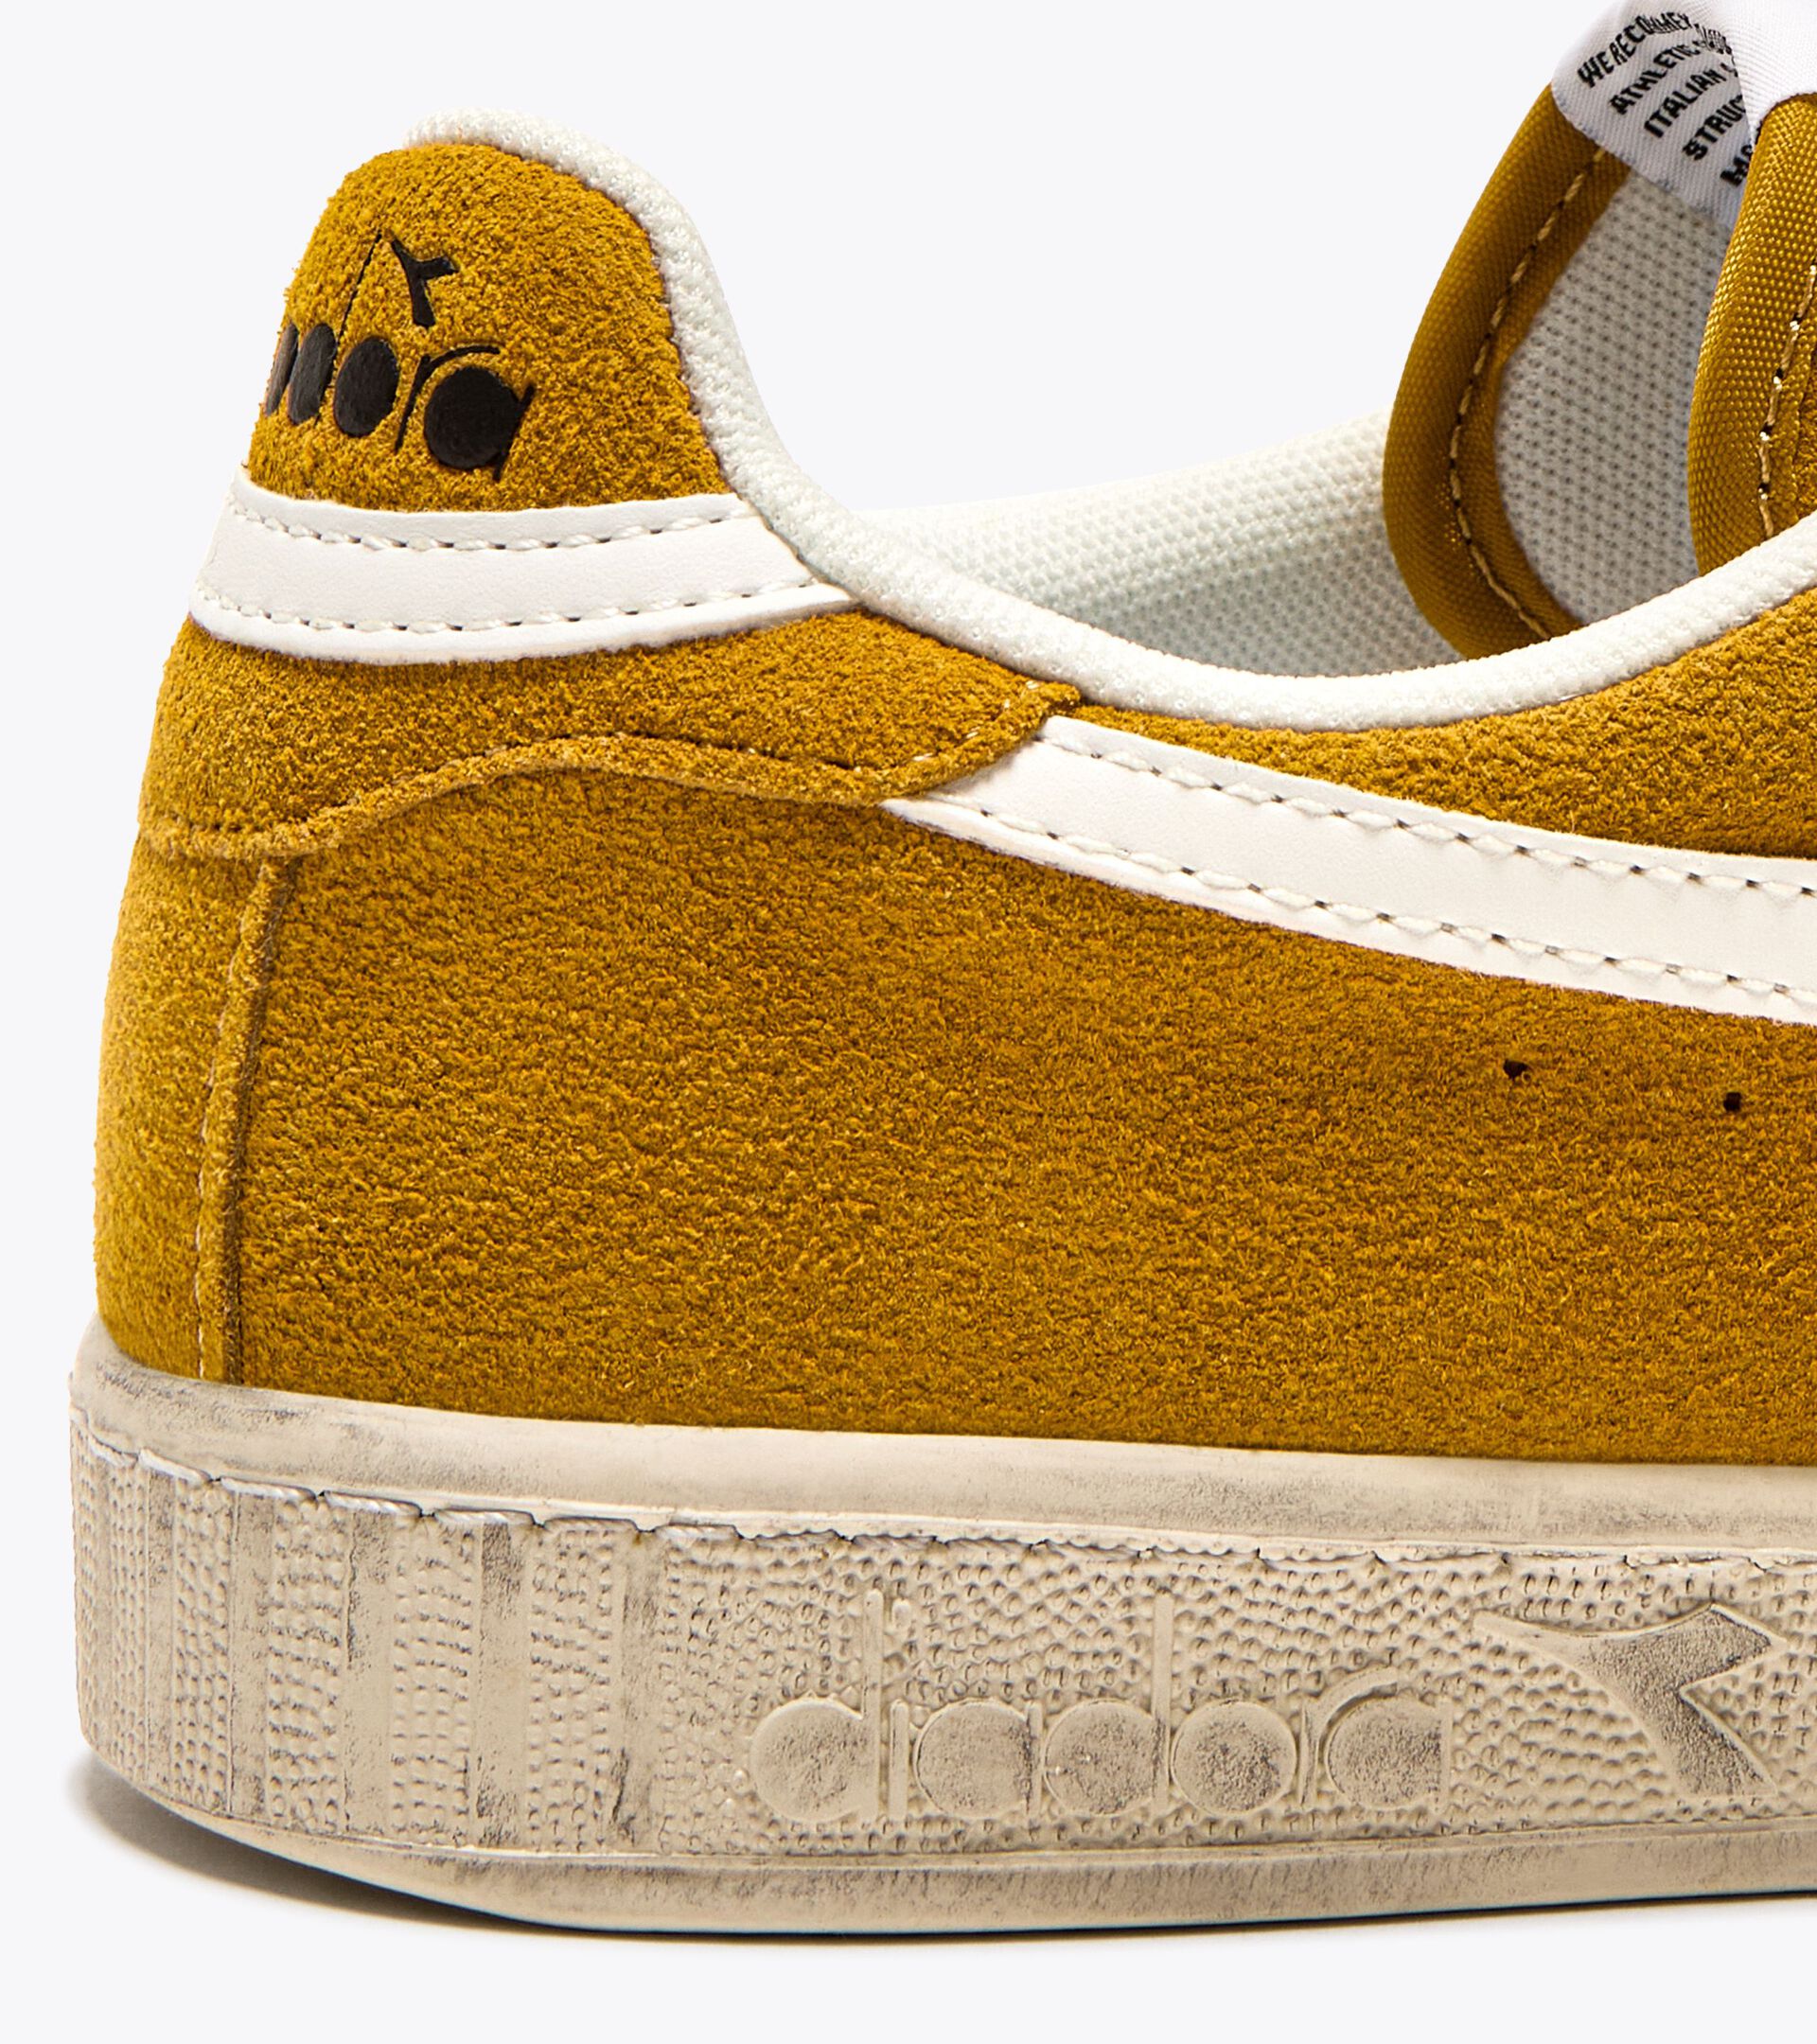 Sporty sneakers - Gender neutral GAME L LOW SUEDE WAXED YELLOW OCHRE - Diadora